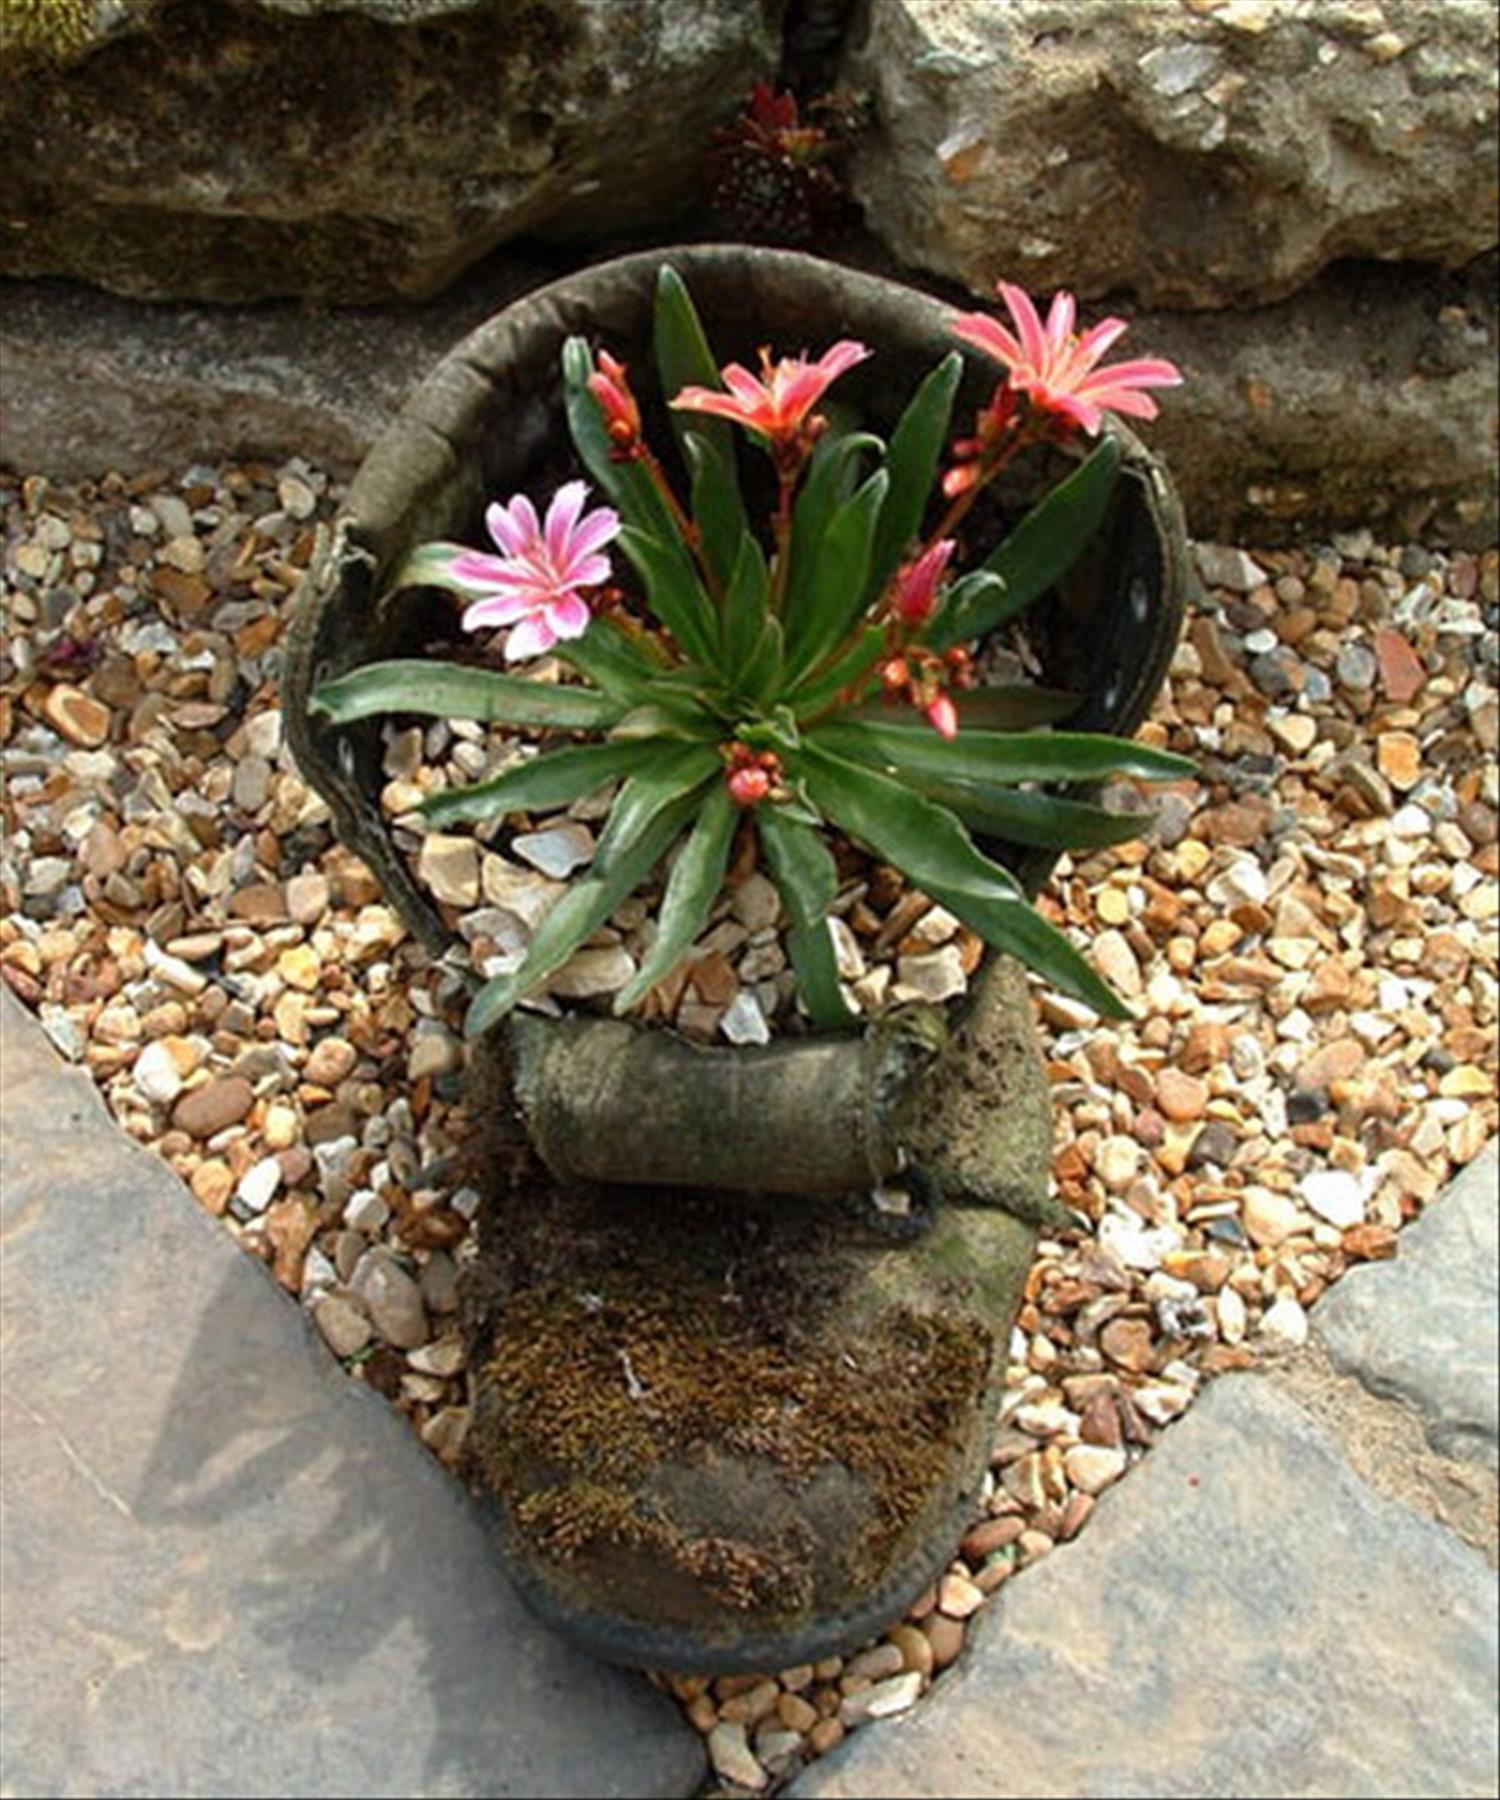 DIY plants in shoes: Recycled Footwear makes a Great Garden Planter